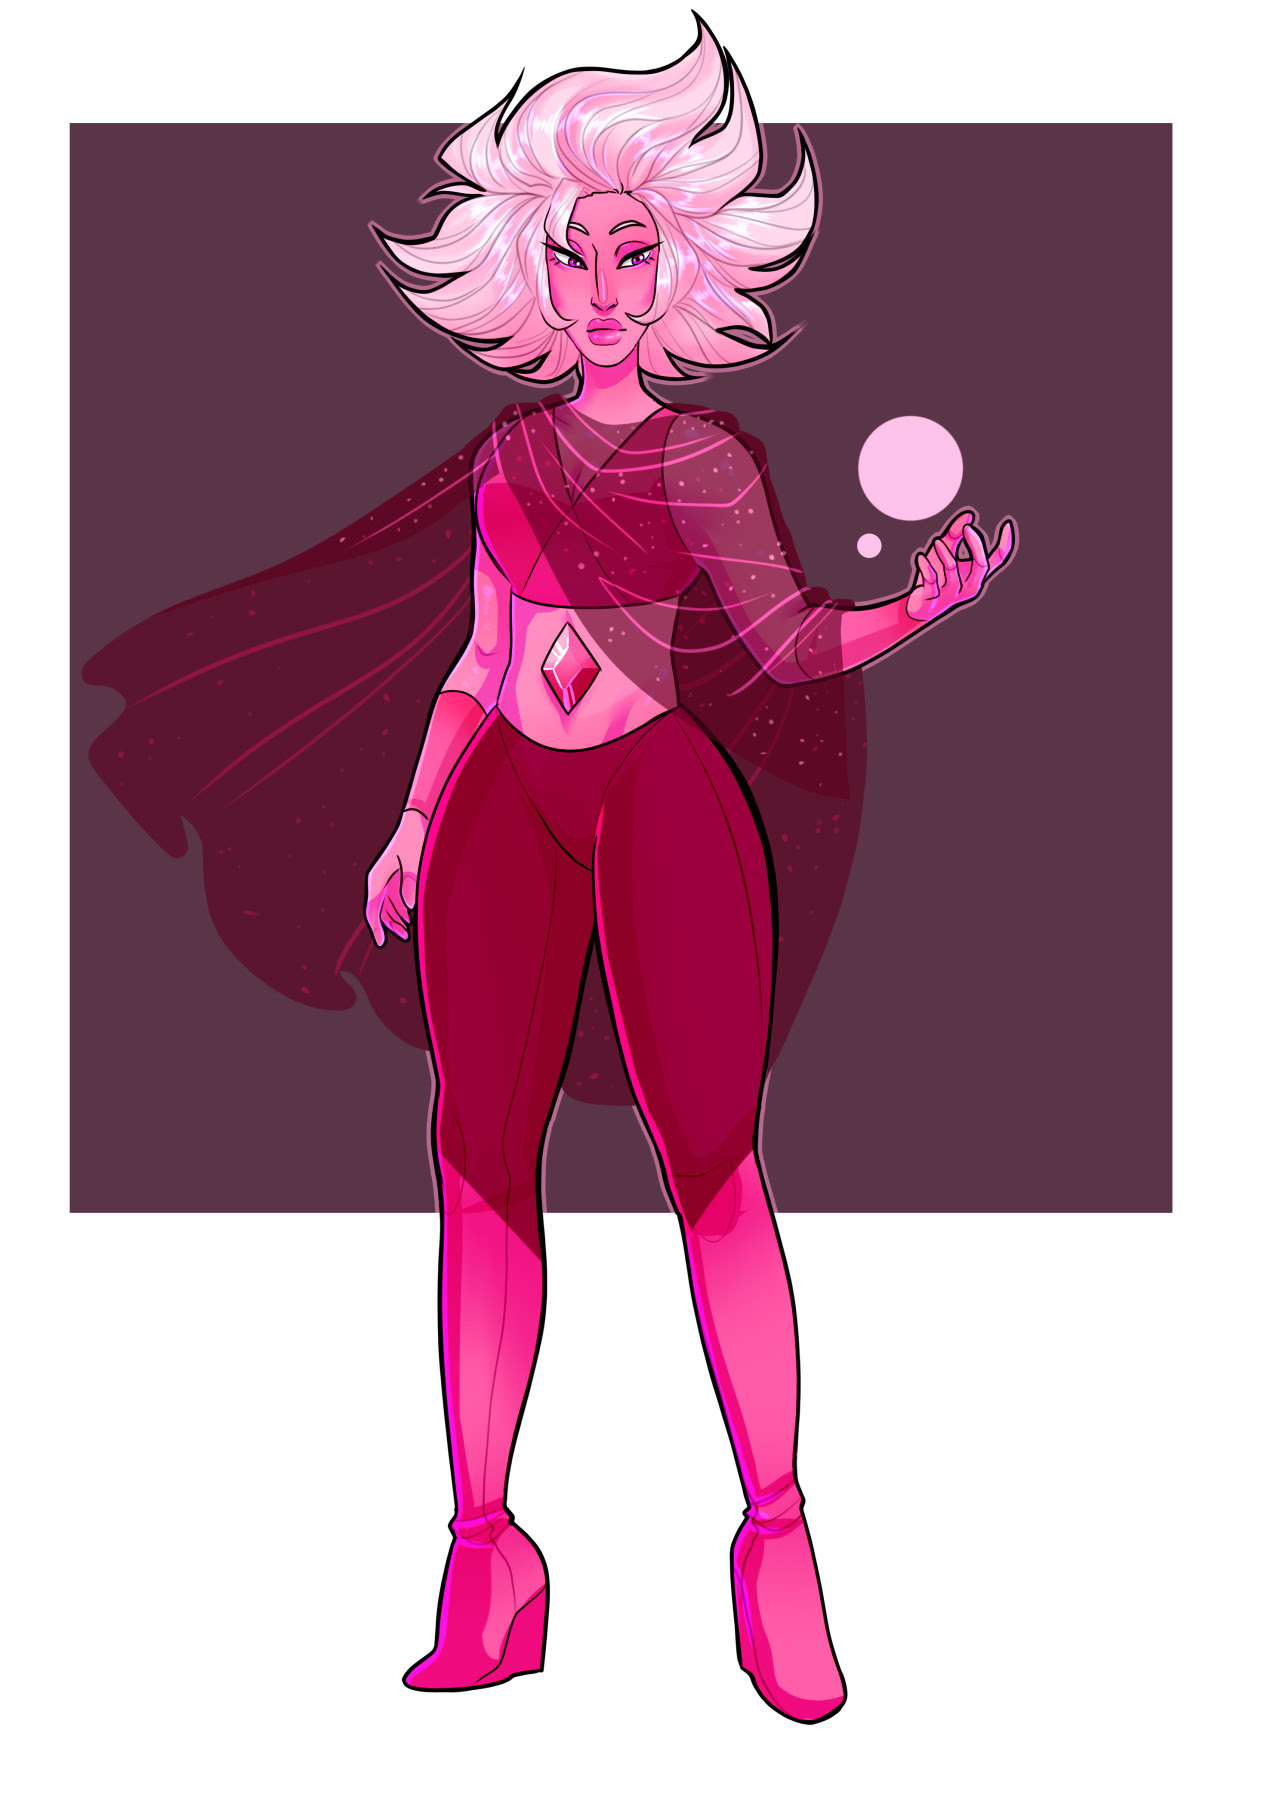 My Patrons requested my personal take on what Pink Diamond would look like(based on her mural, and if she wasn’t already an existing character LOL)
Patreon | Commissions